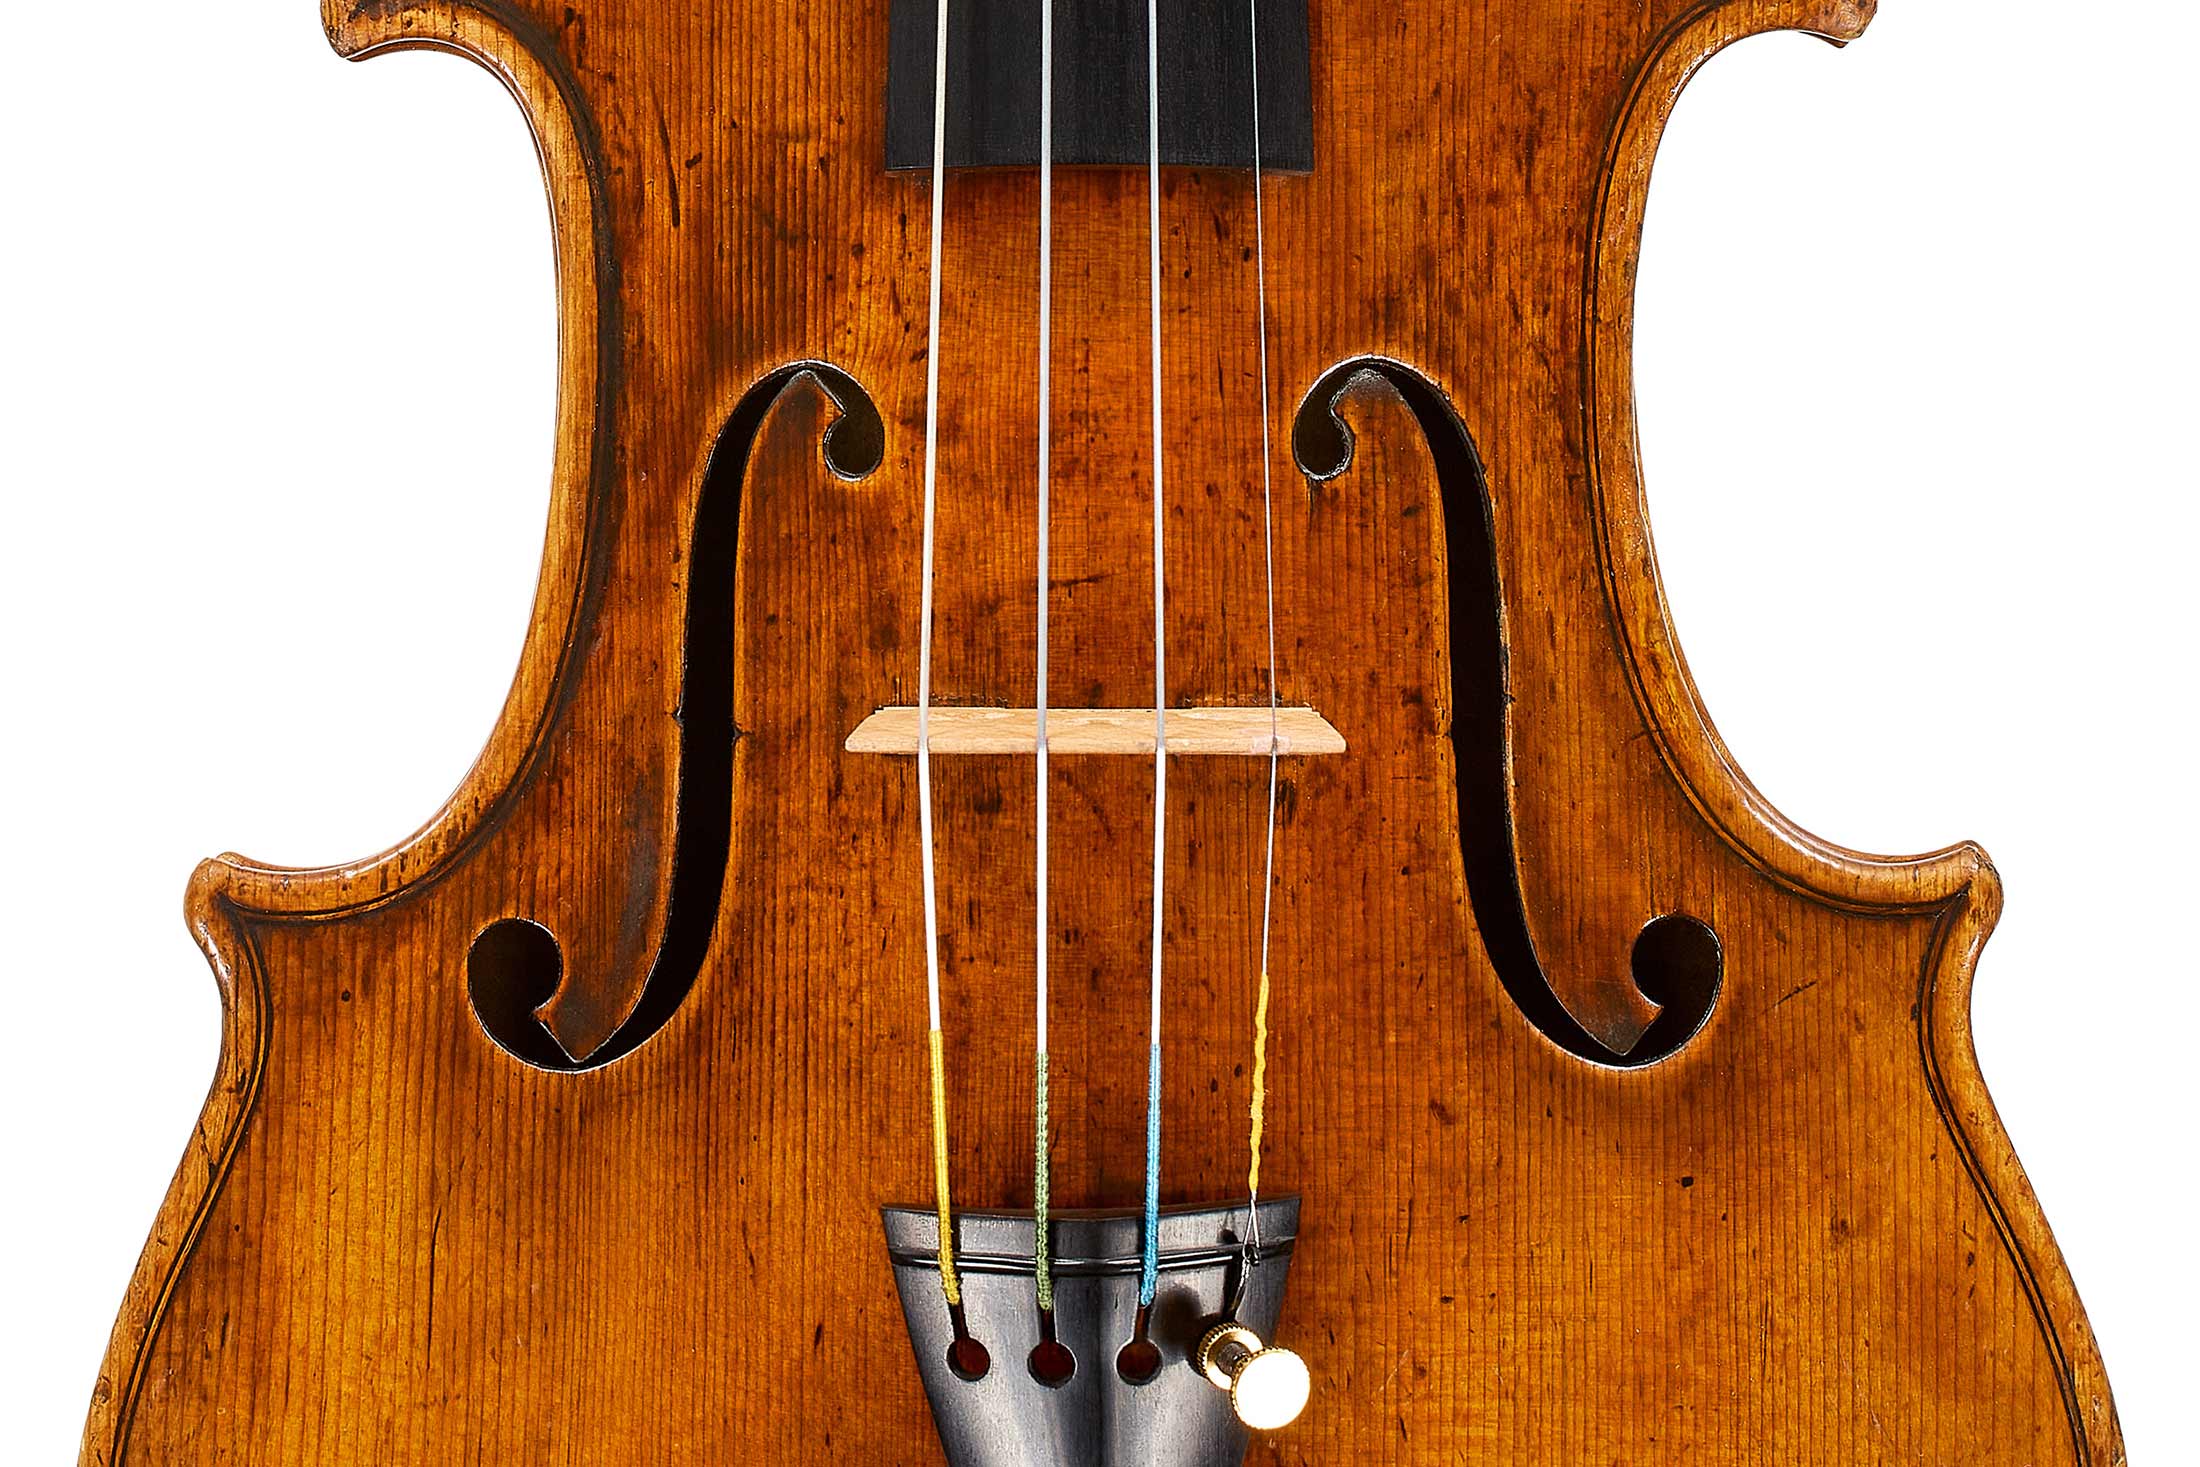 Bulk Minearbejder analog A Rare Stradivarius Estimated at $20 Million Heads to Auction - Bloomberg